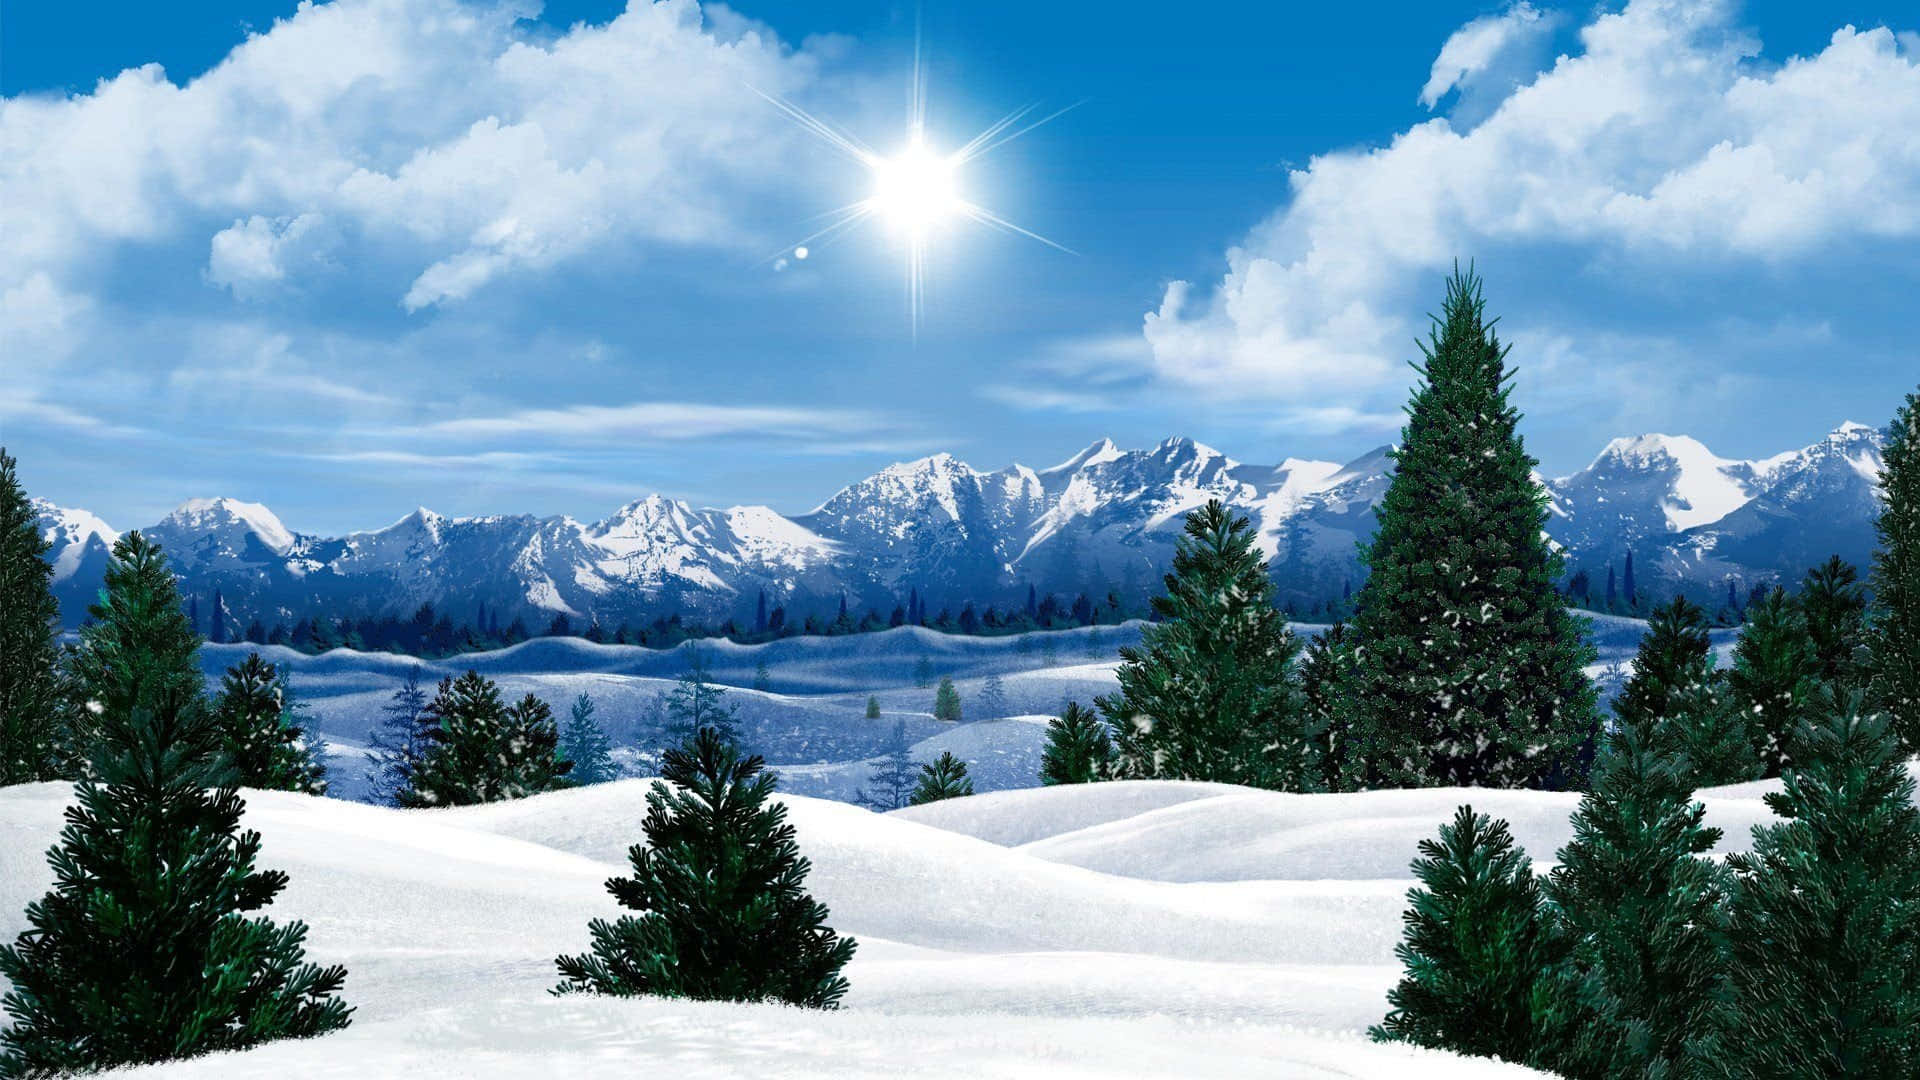 Snowy landscape with clear blue sky Wallpaper